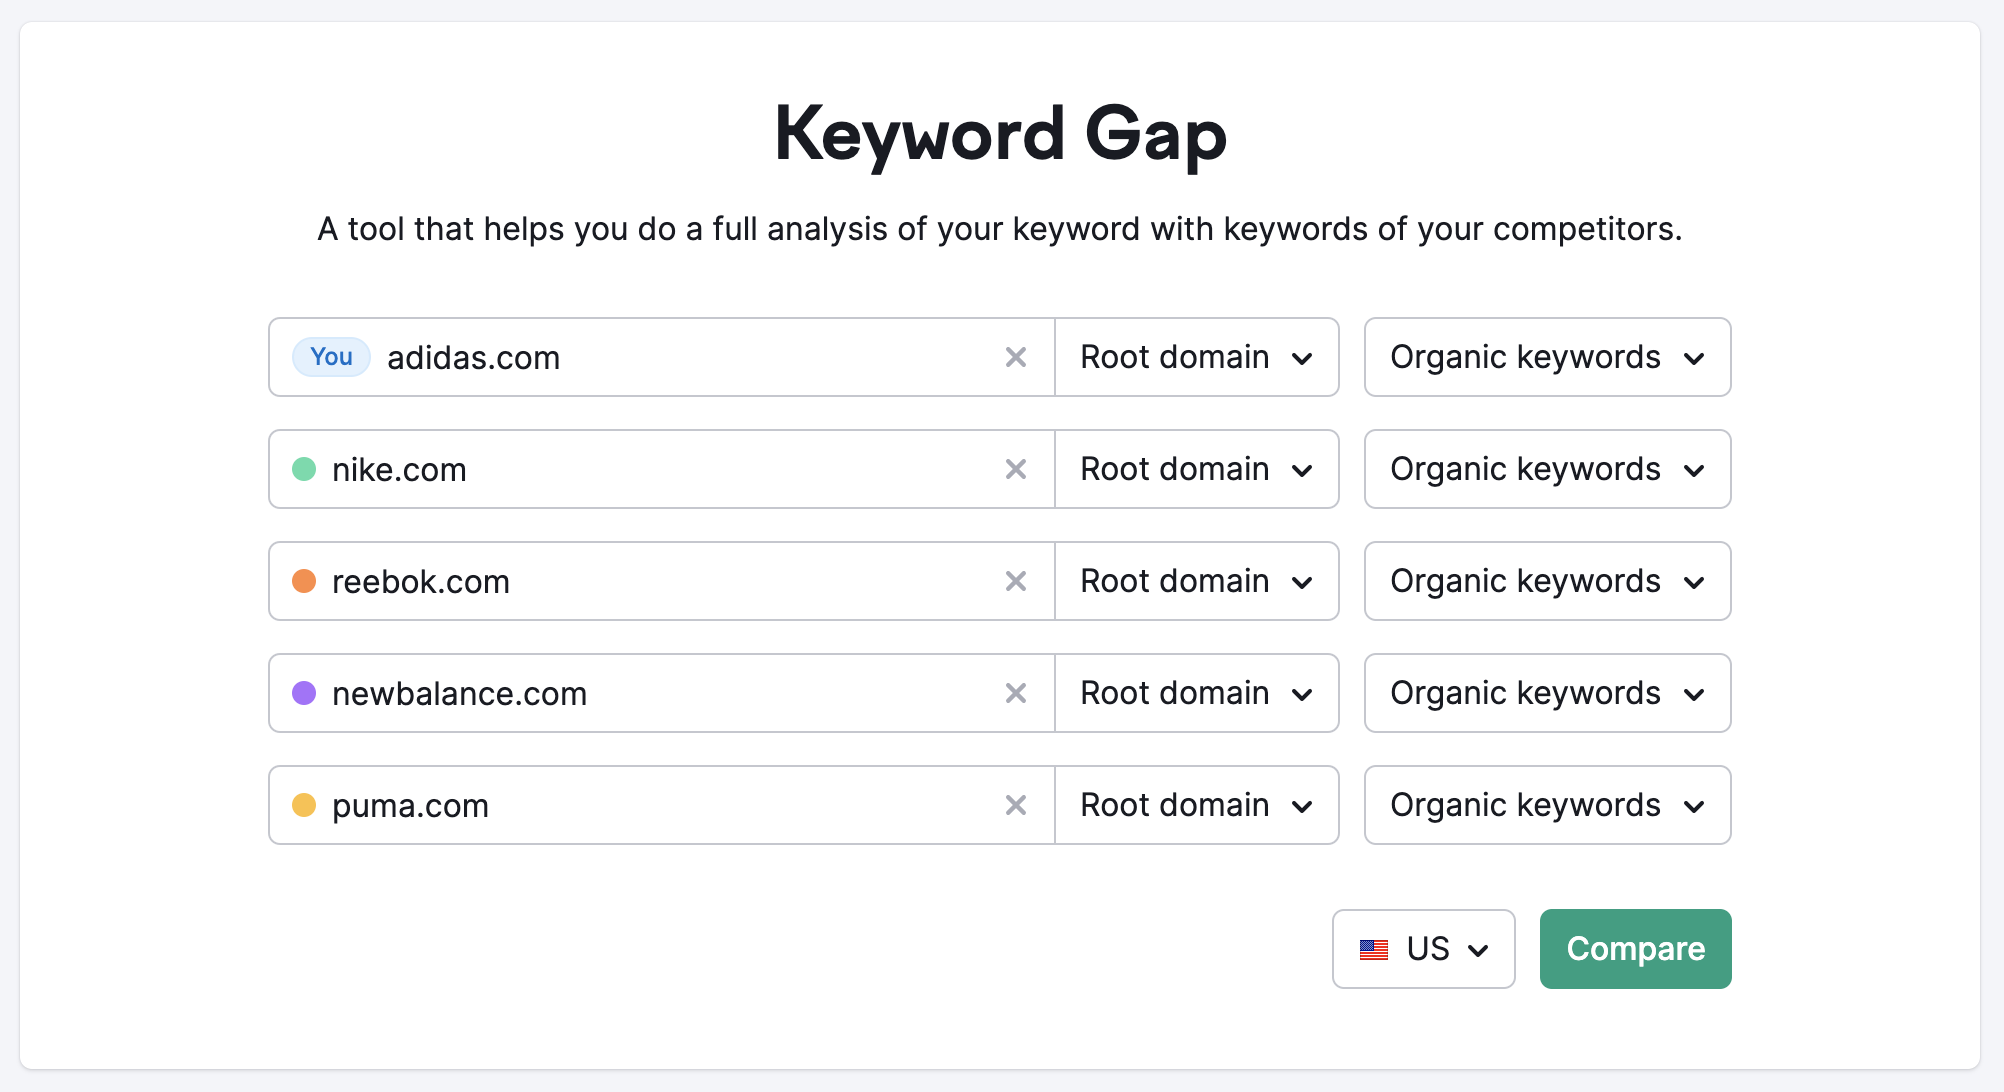 Keyword Gap landing page with 5 competitors added with the root domain and organic keywords as a scope.